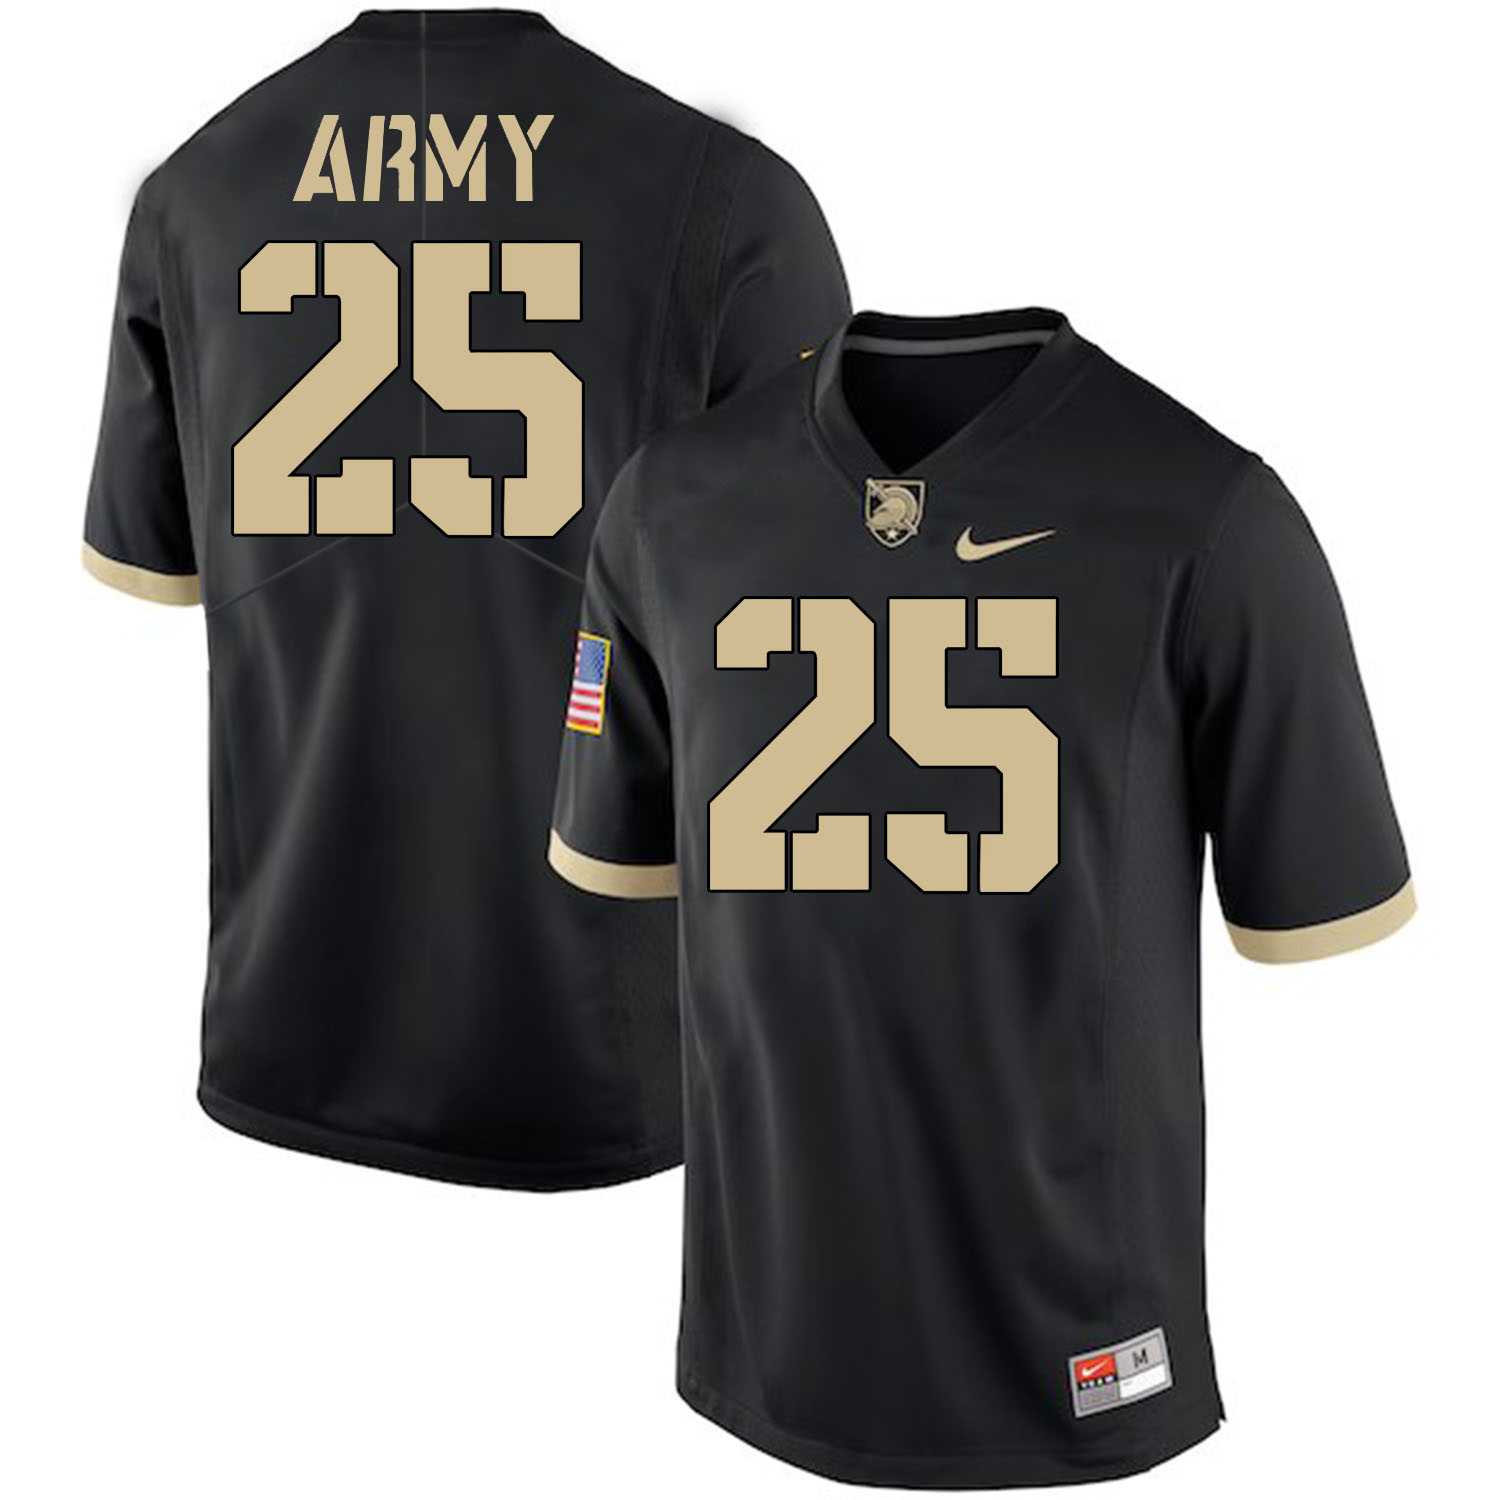 Army Black Knights #25 Connor Slomka Black College Football Jersey